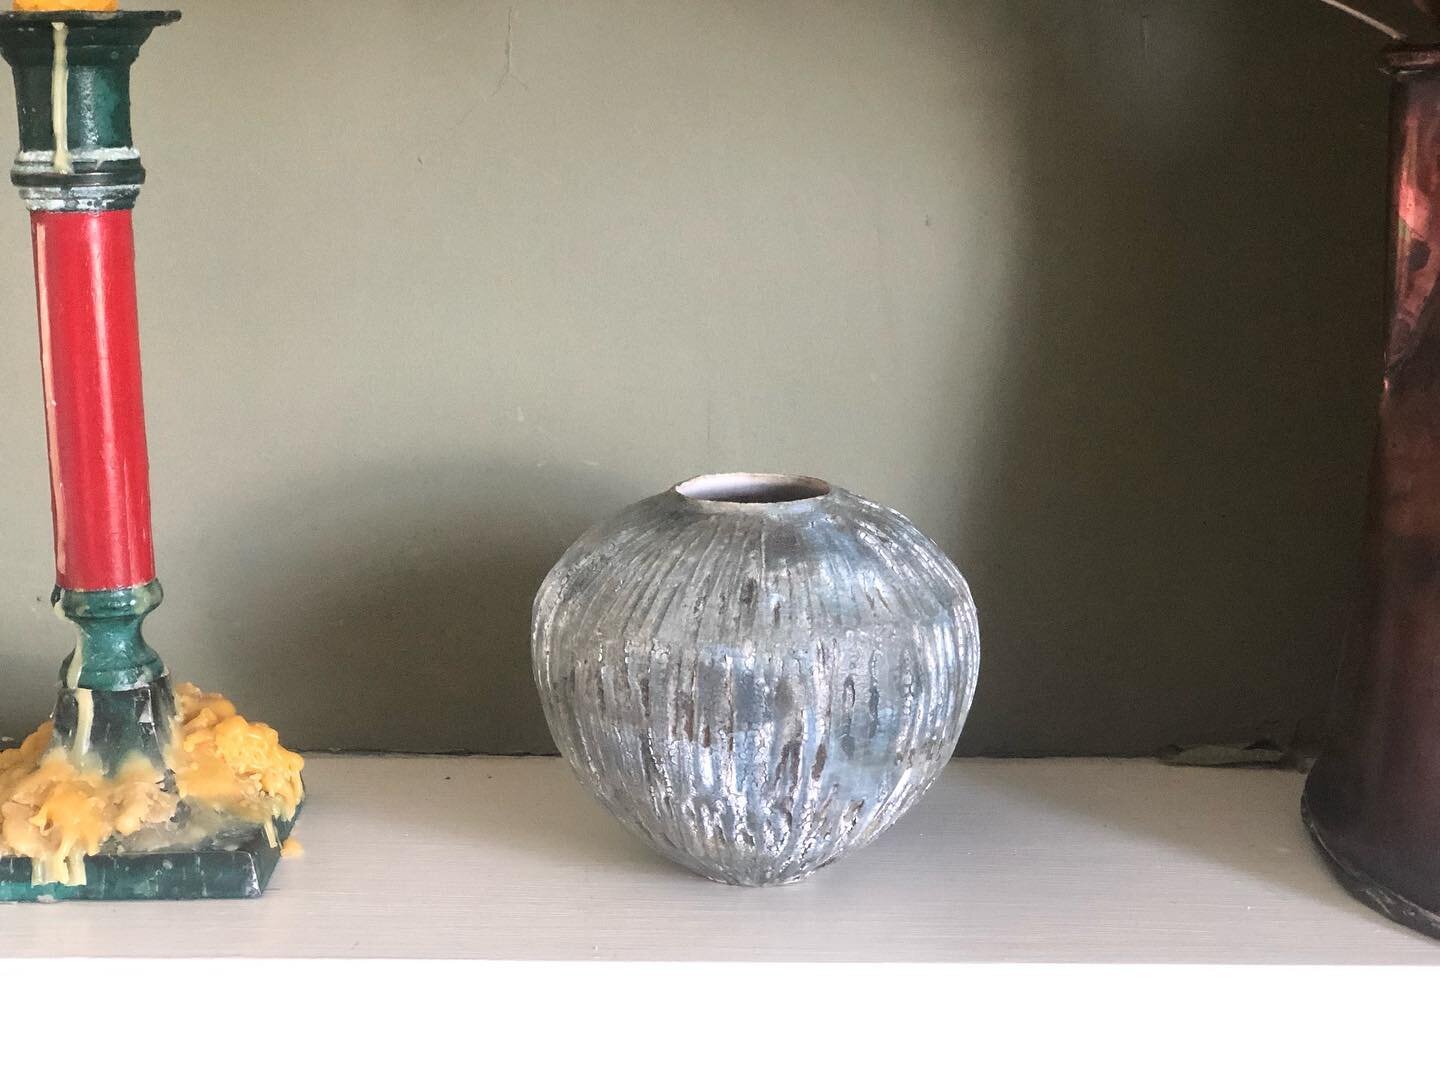 A very beautiful addition to Kames Farm&hellip;. Piece from Lise Herud Braten. The only thing which prevented me buying the larger piece in the window was transportation but it&rsquo;s on my Christmas list. Just saying&hellip;..
#pottery #coloursofth